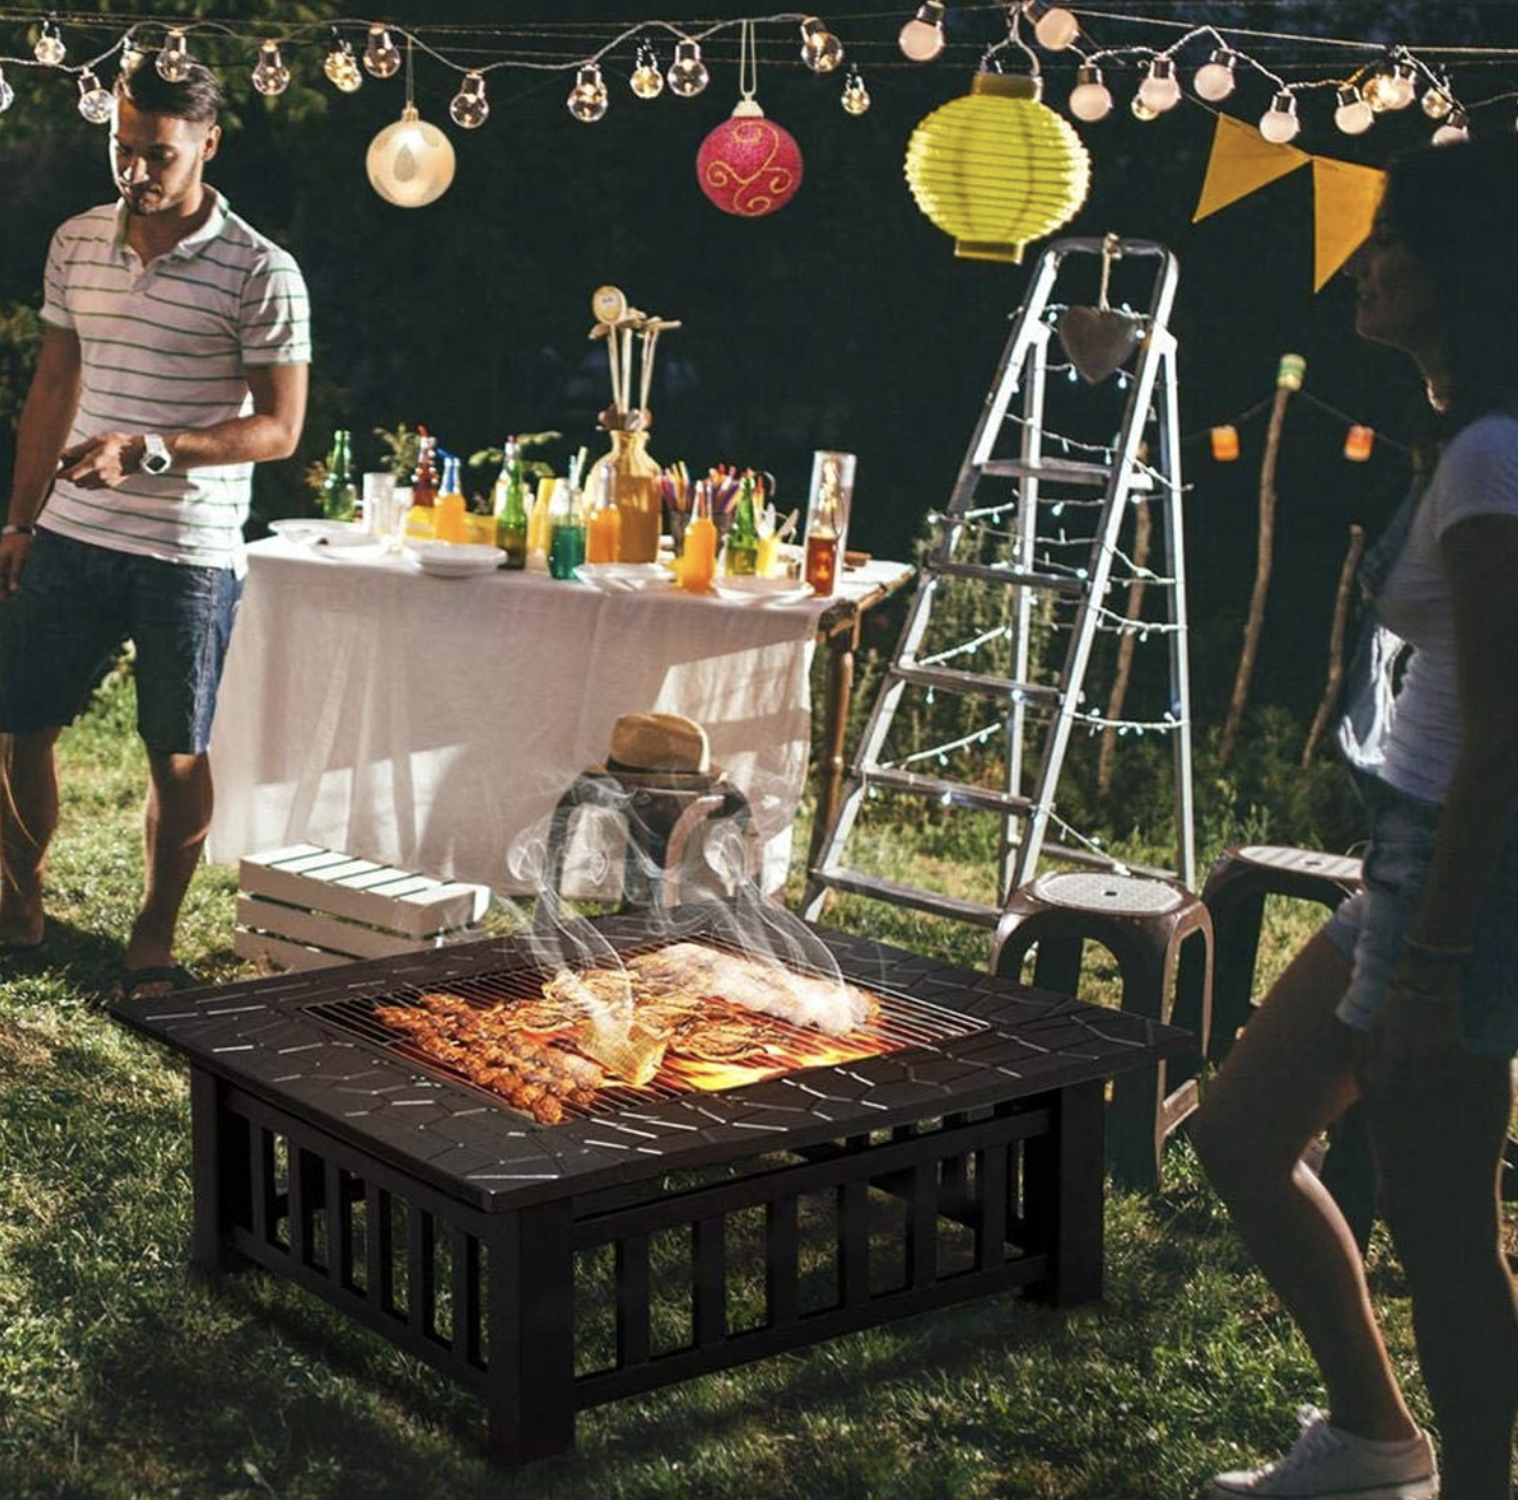 the square fire pit in a backyard during a party